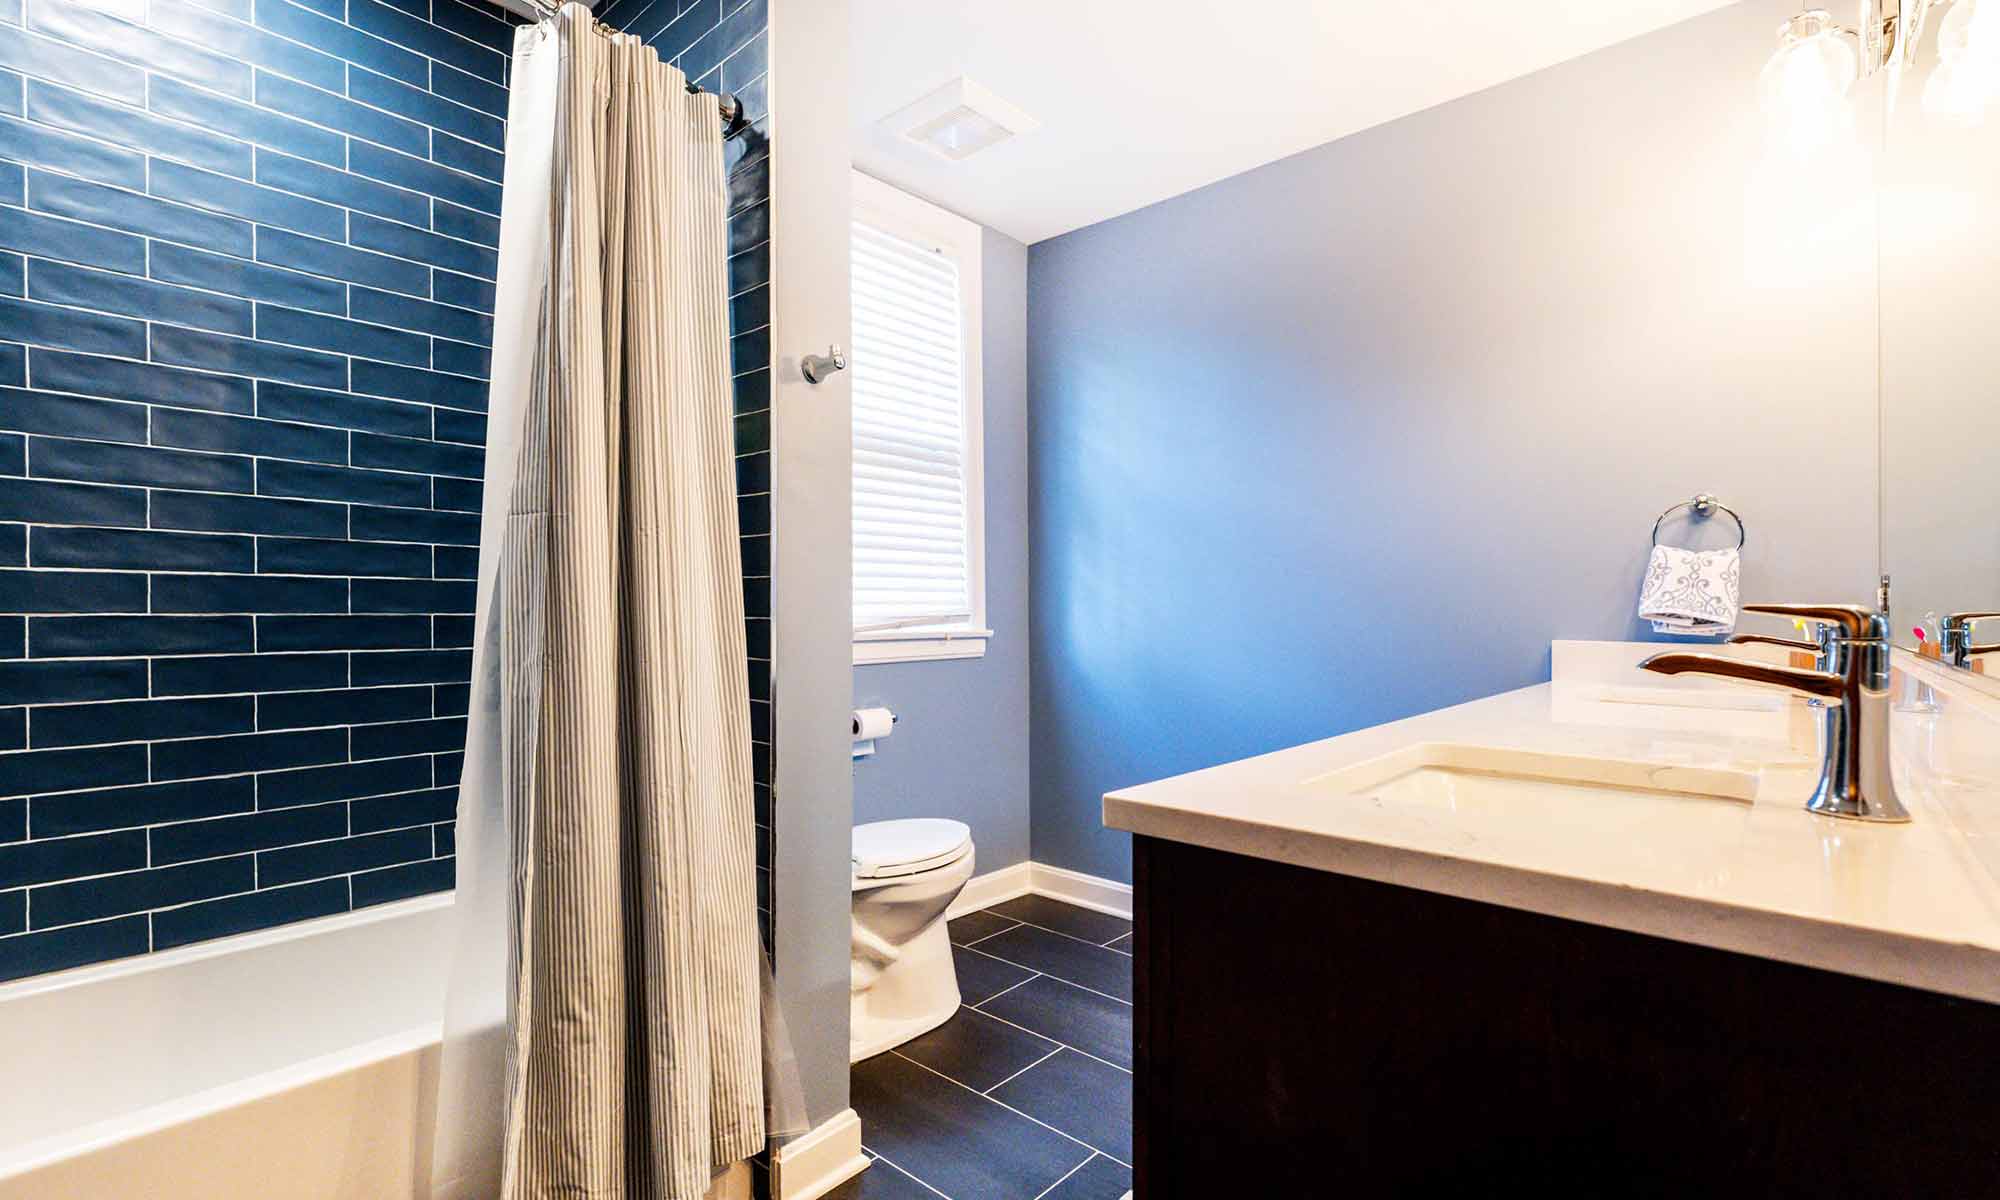 Updated blue bathroom with deep blue subway-tiled shower